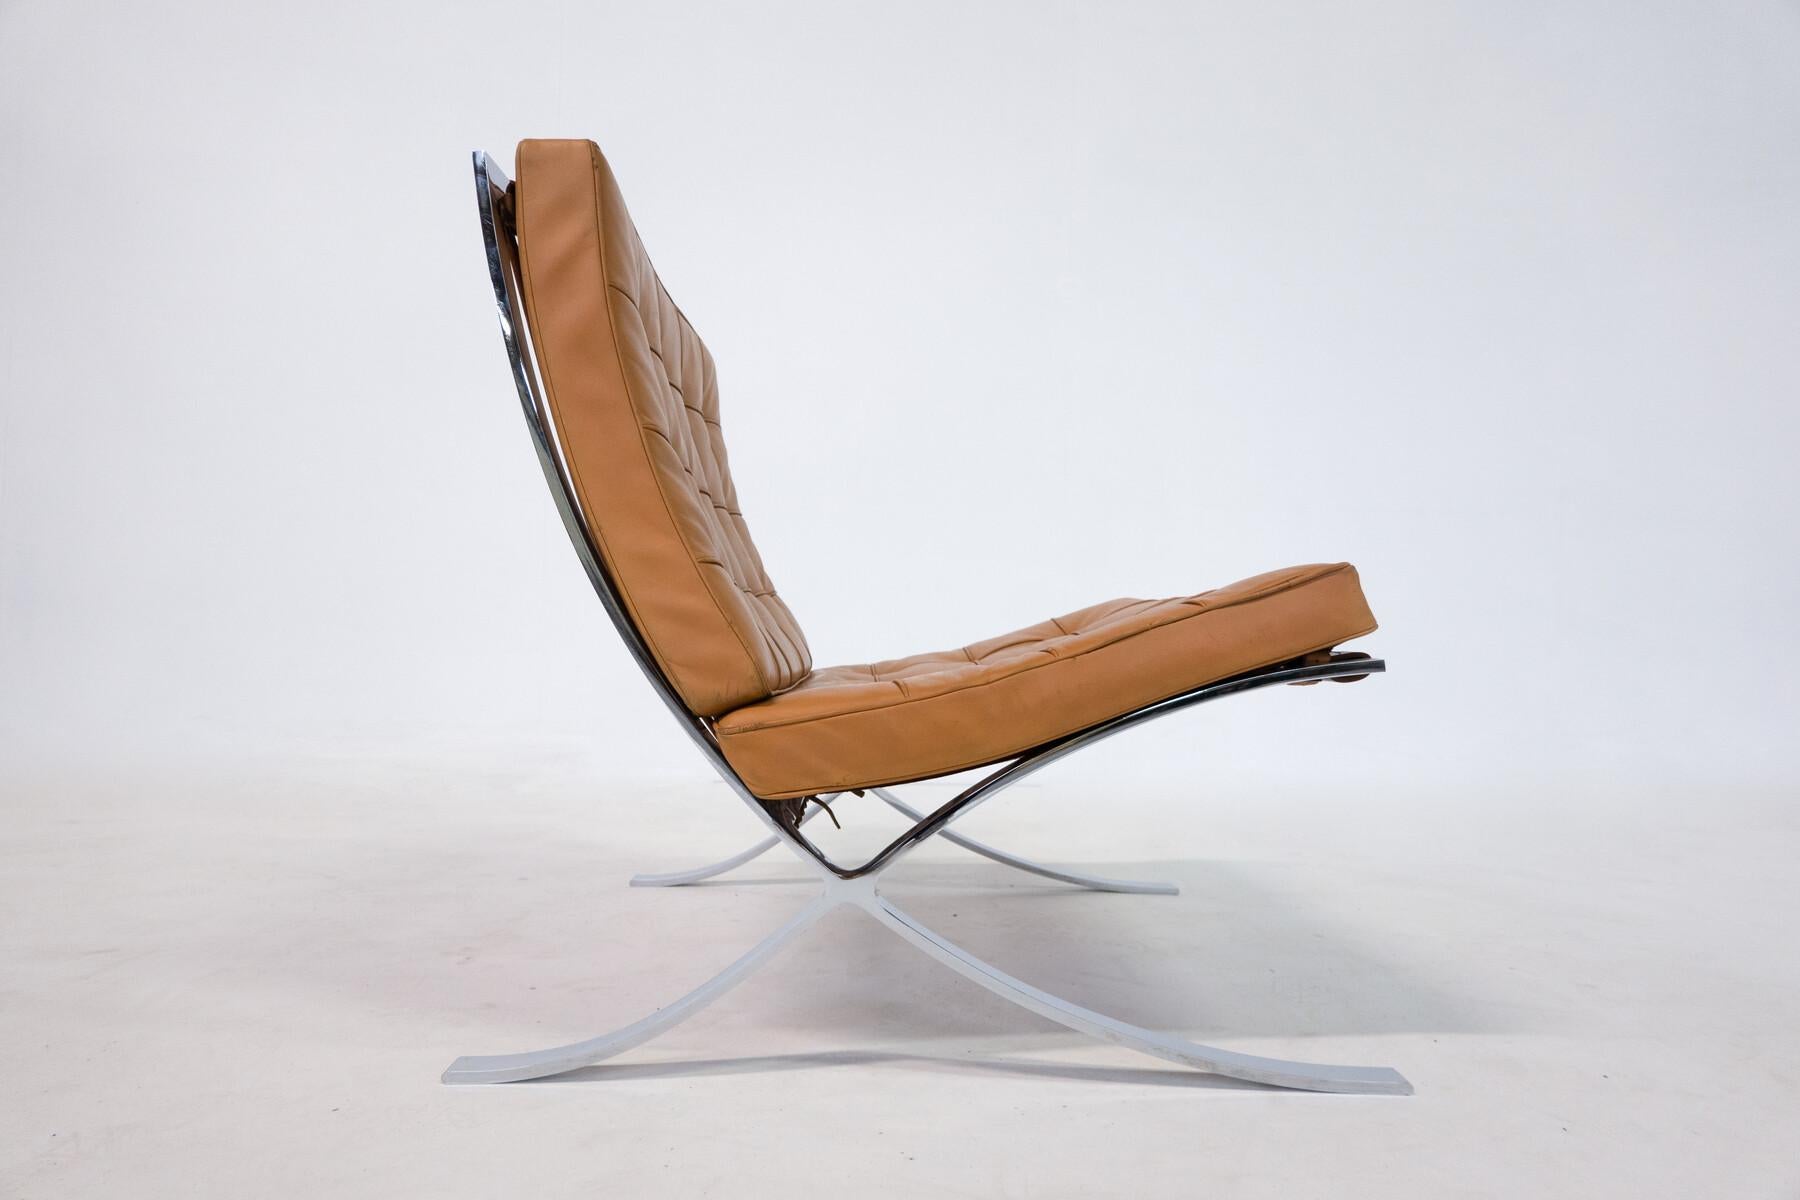 Pair of Cognac Leather Barcelona Chairs by Mies Van Der Rohe for Knoll, 1960s For Sale 1